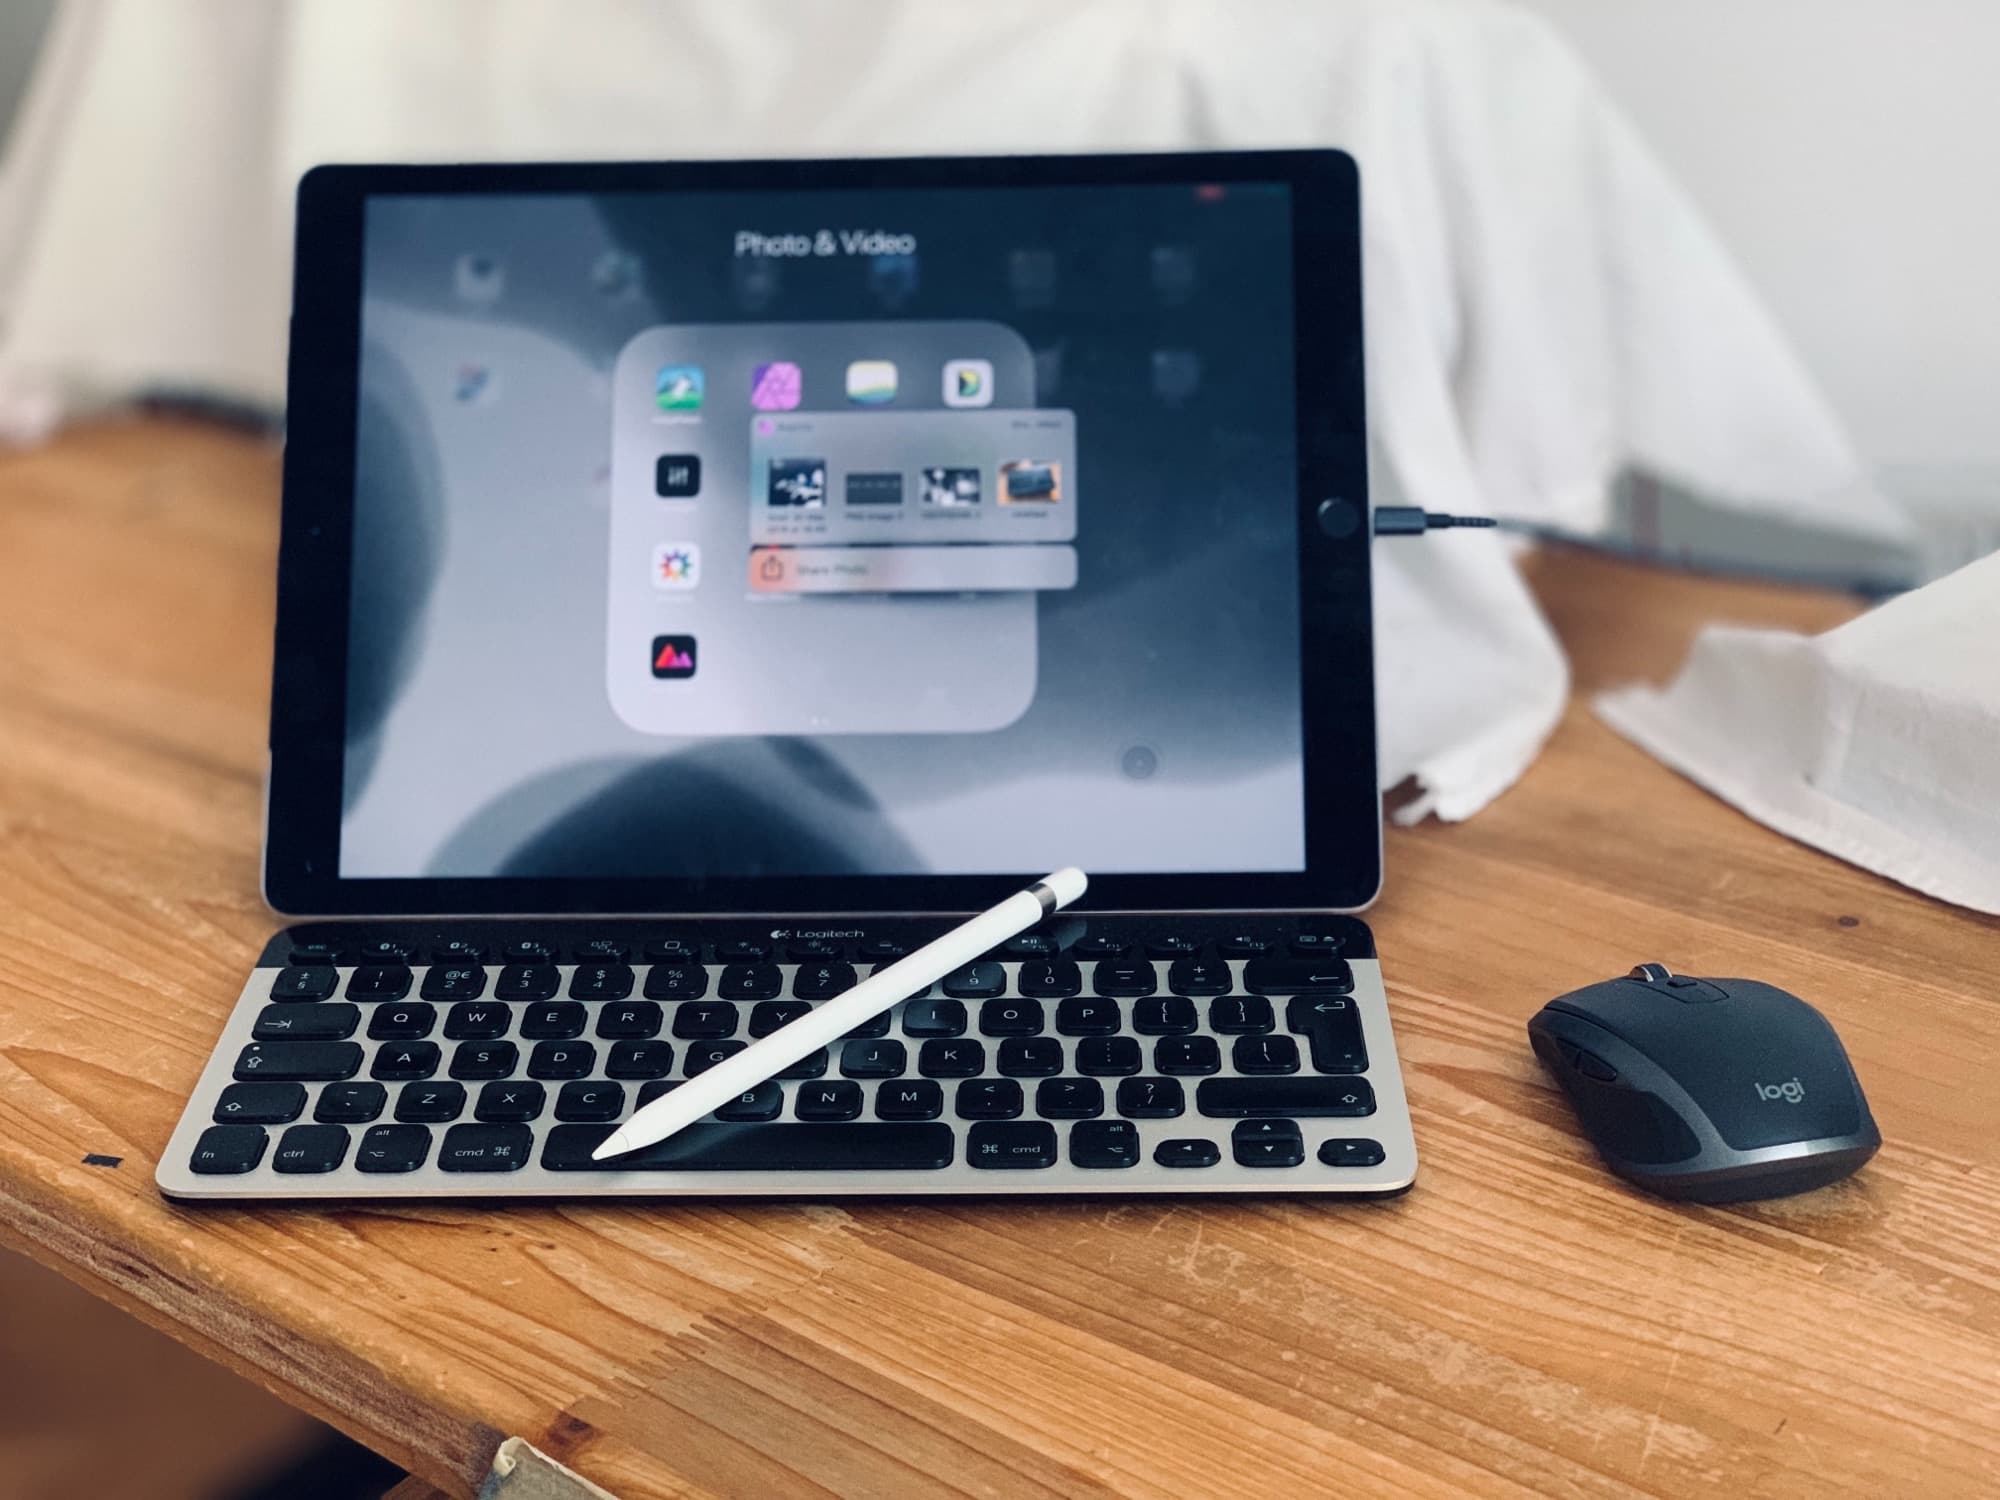 With iPadOS, you're one step closer to replacing your Mac with an iPad.